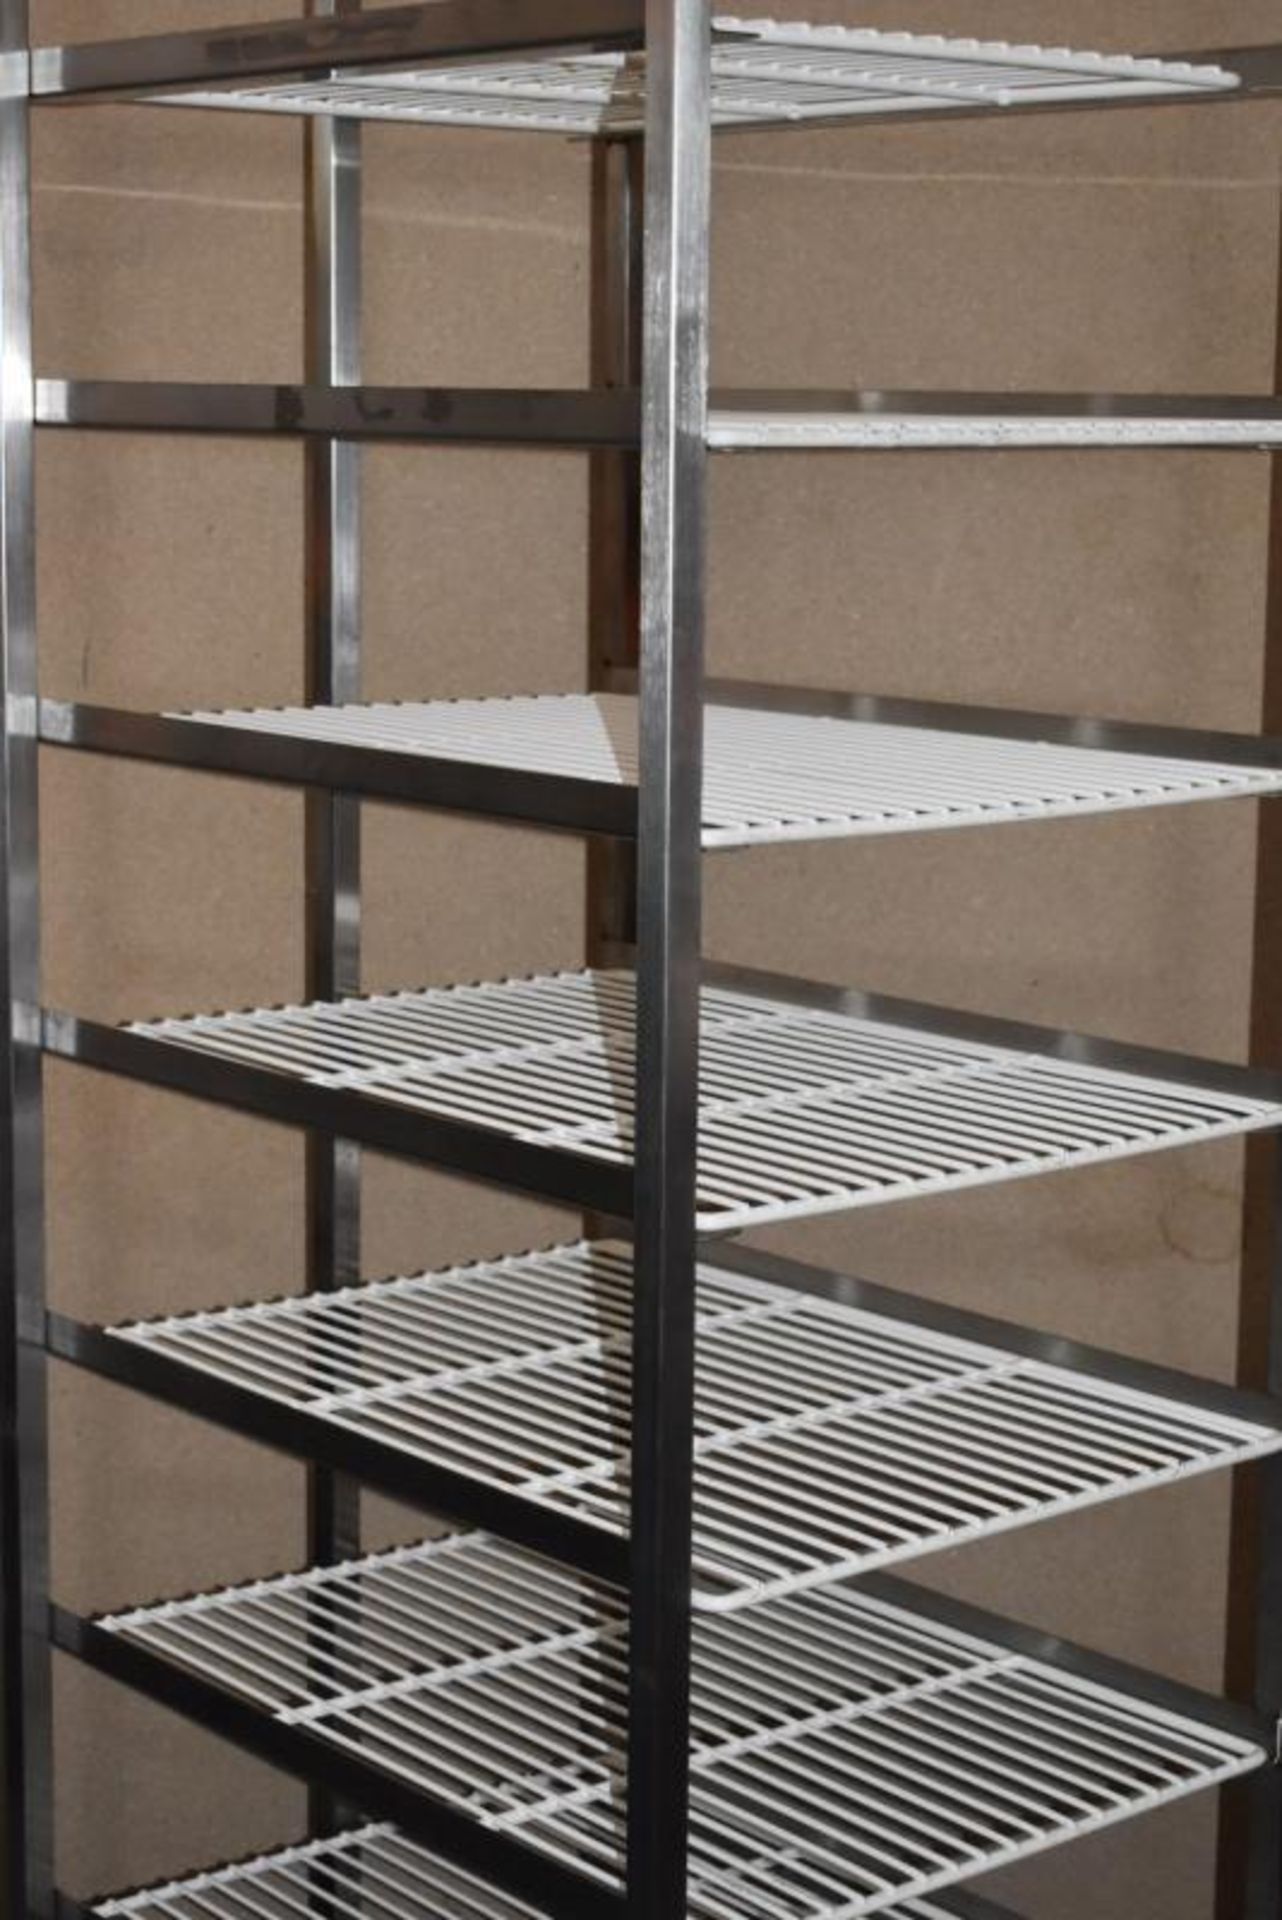 1 x Stainless Steel 8 Tier Mobile Shelf Unit For Commercial Kitchens With White Coated Wire Shelves - Image 8 of 11